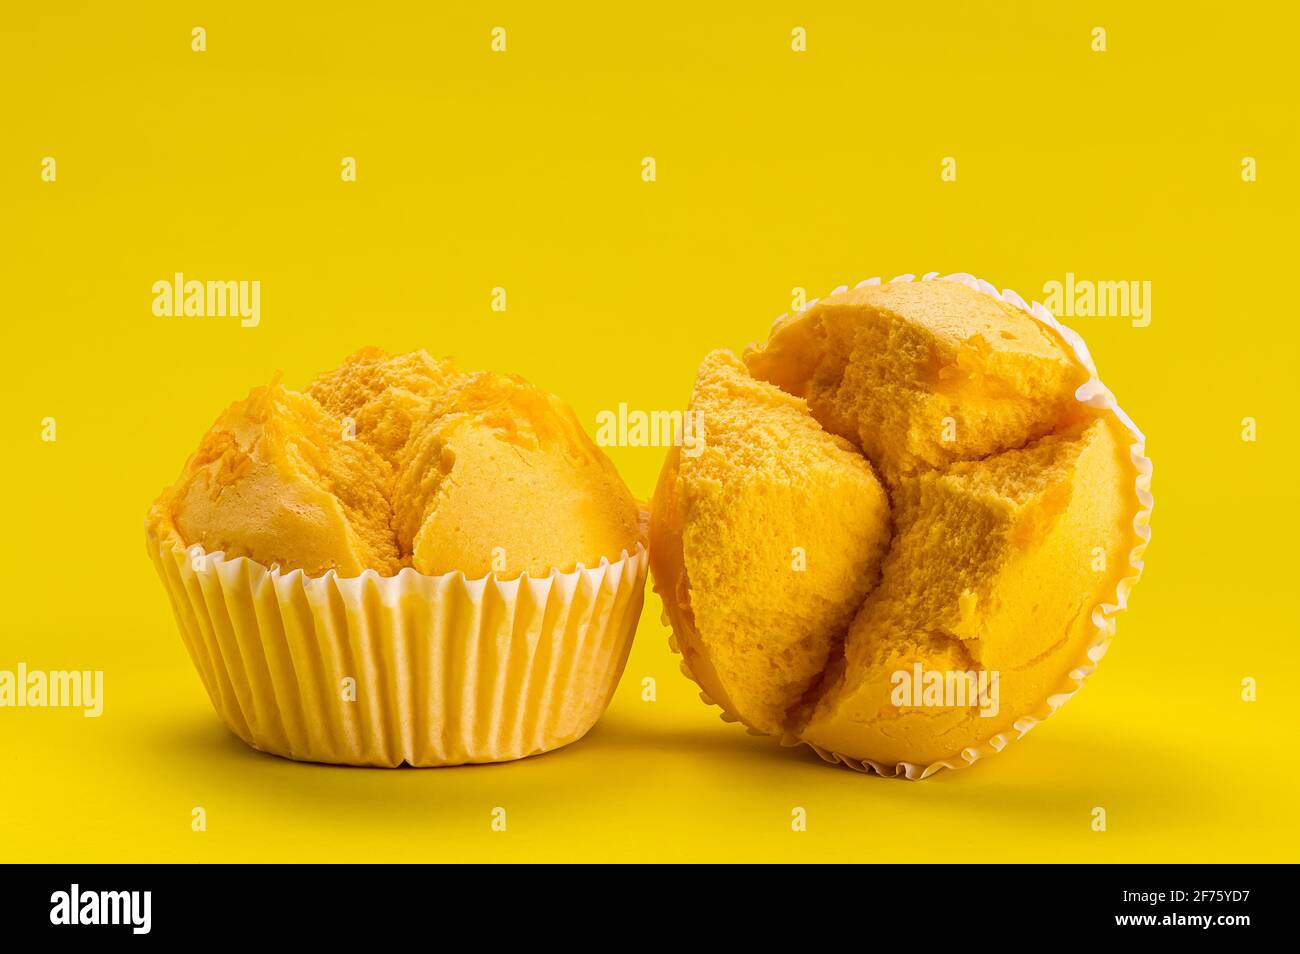 Side view closeup of homemade yellow cotton candy with golden egg yolk threads on yellow background Stock Photo